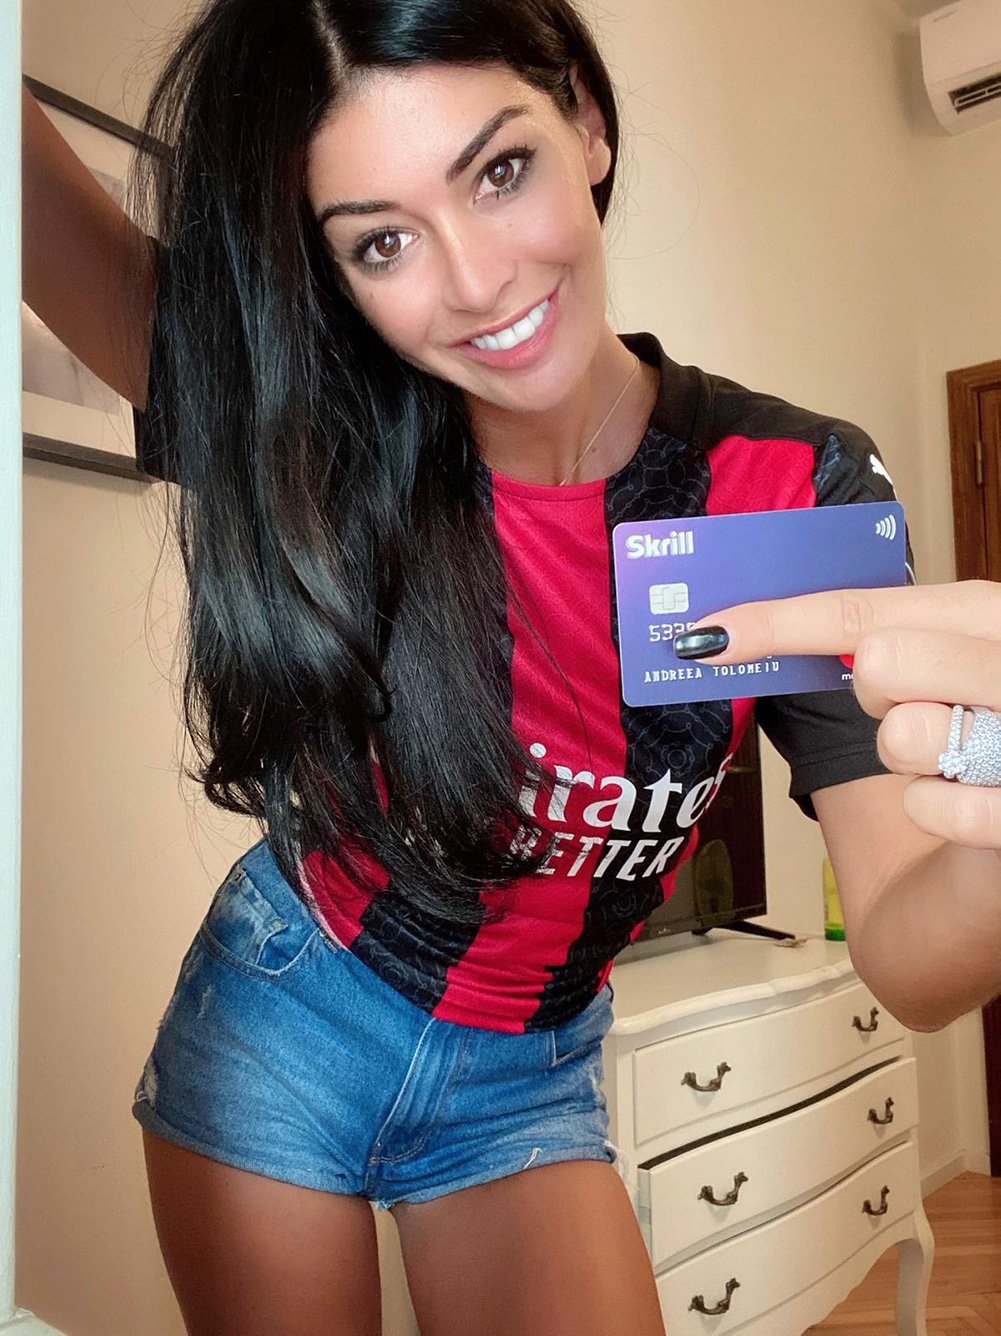 Andreea Tolomeiu models the new kit with her Skrill Card in hand.